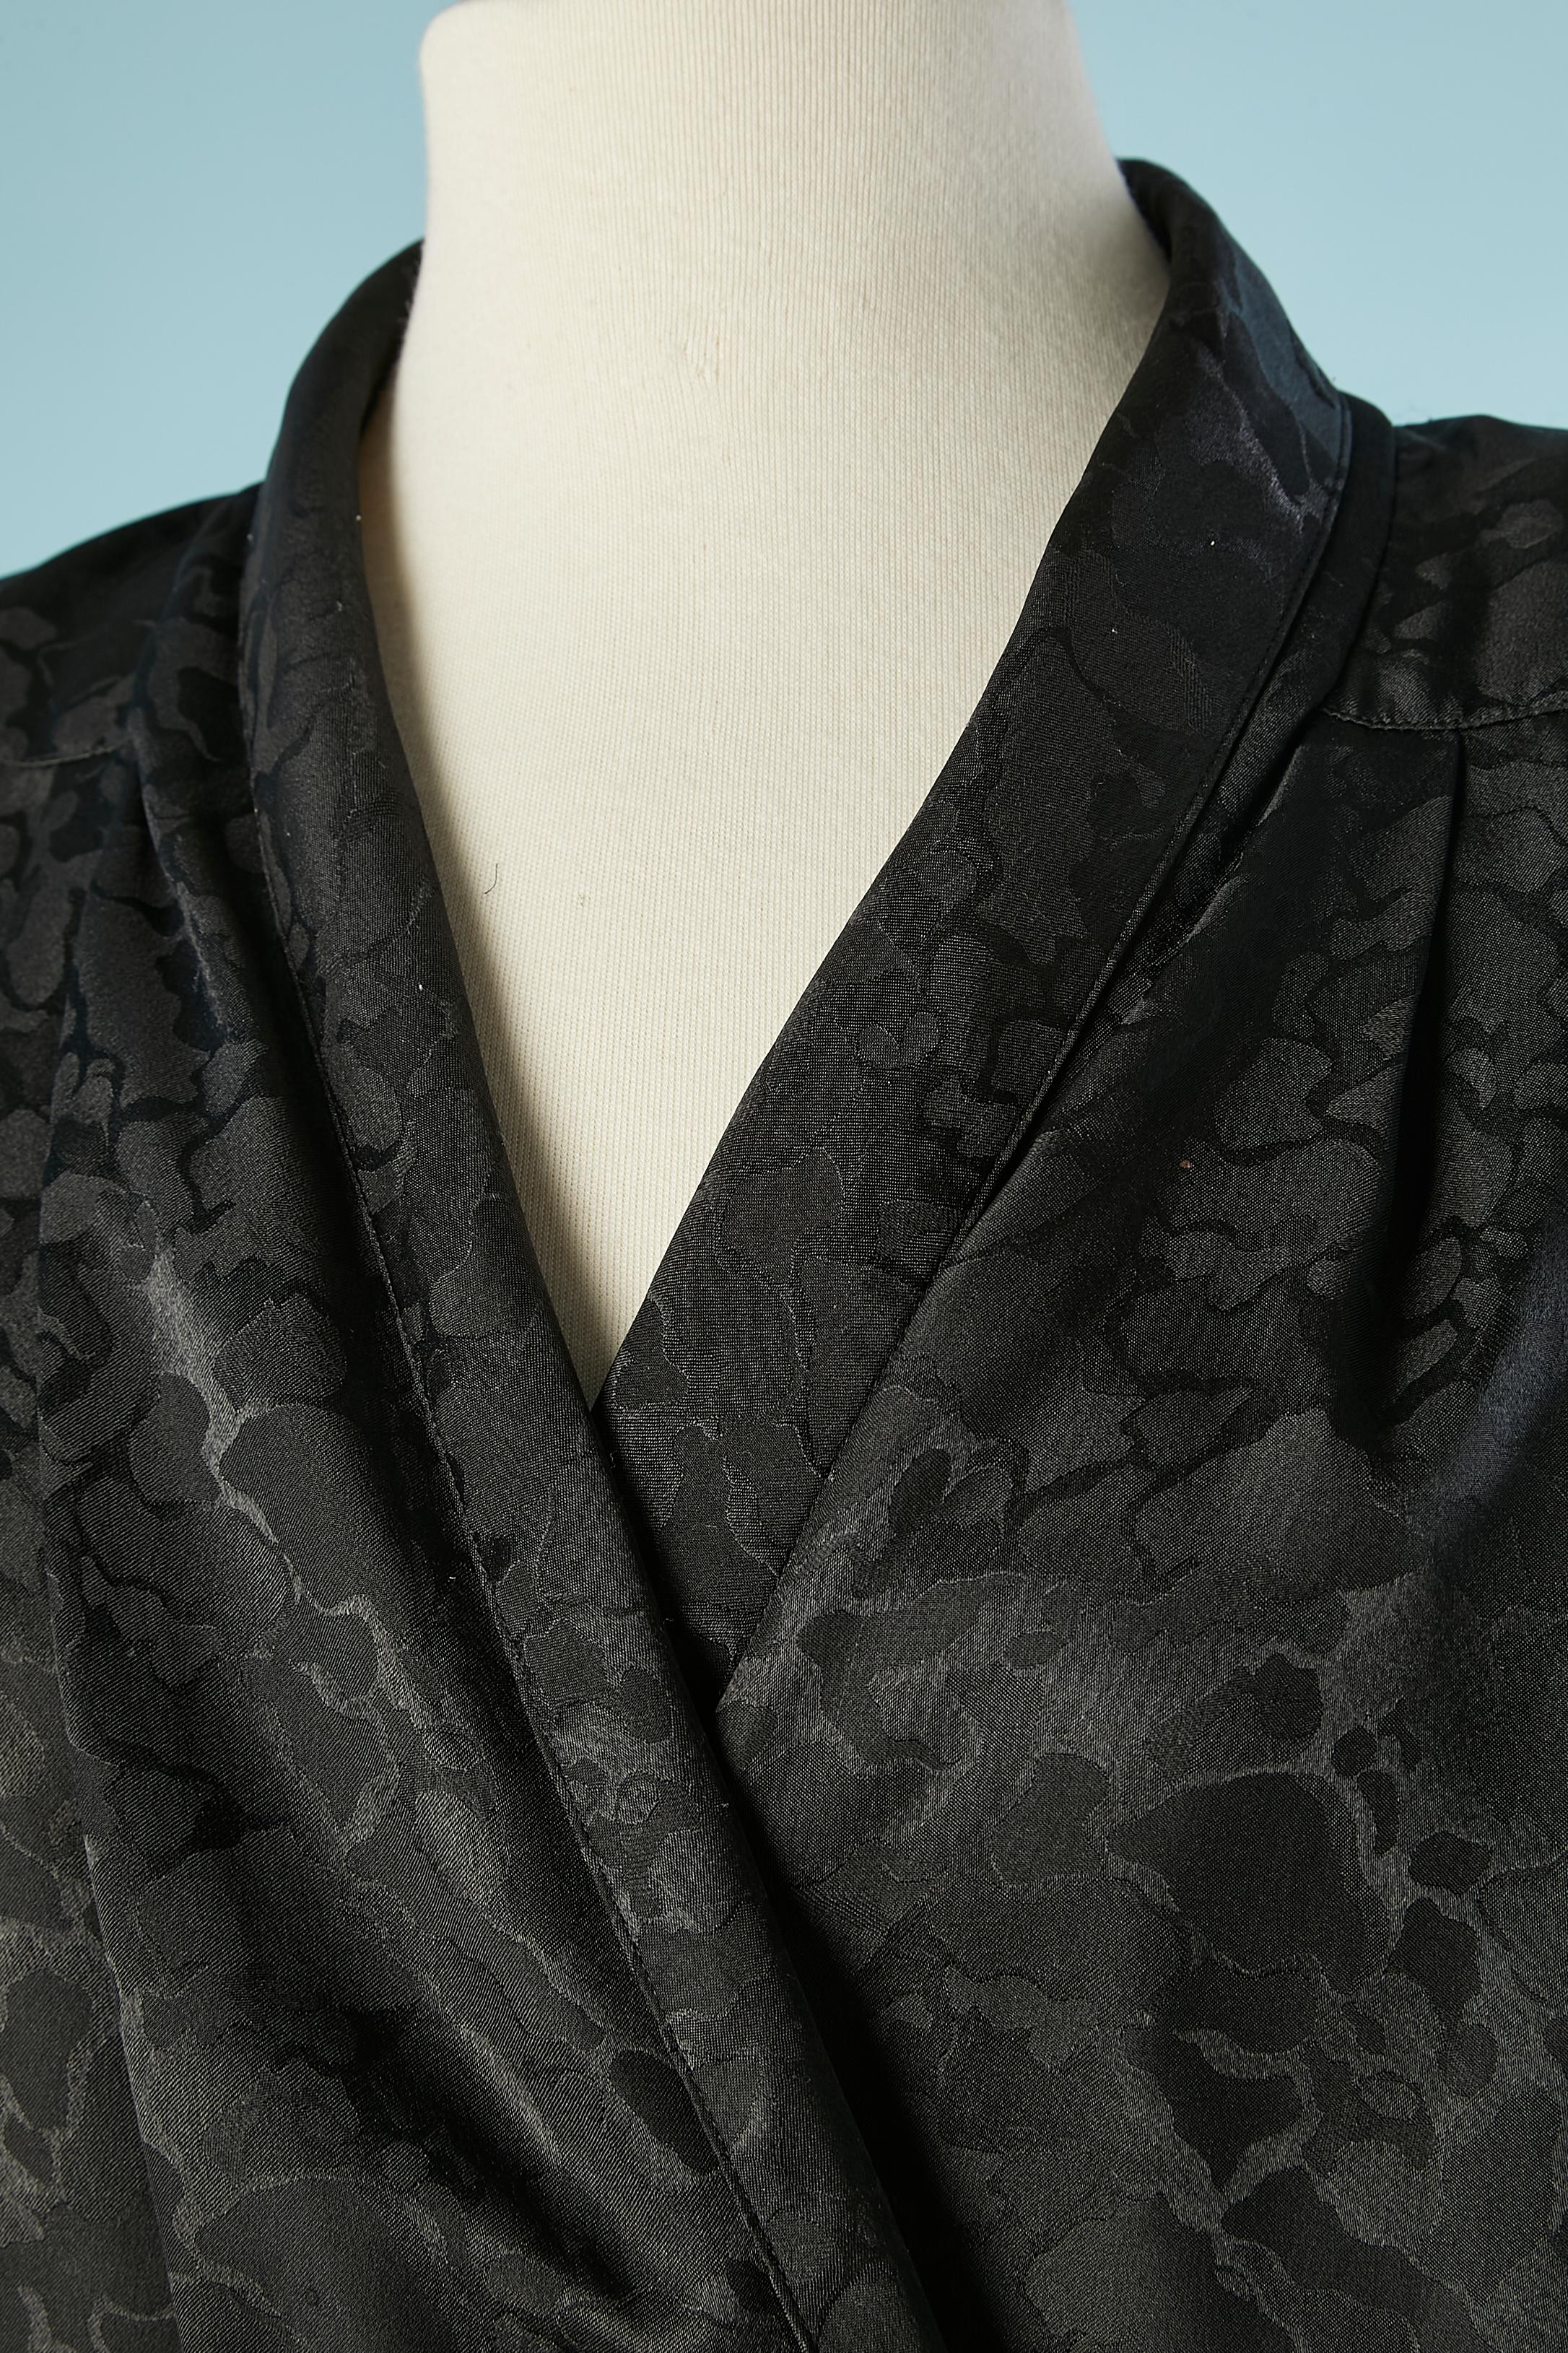 Black jacquard wrap shirt . Fabric composition: 100% polyester. 
Snap and hook&eye closure in the front and bow. Buttons and buttonholes on the cuffs. Shoulder-pad. 
SIZE 8 / 38 (Fr) / M 
